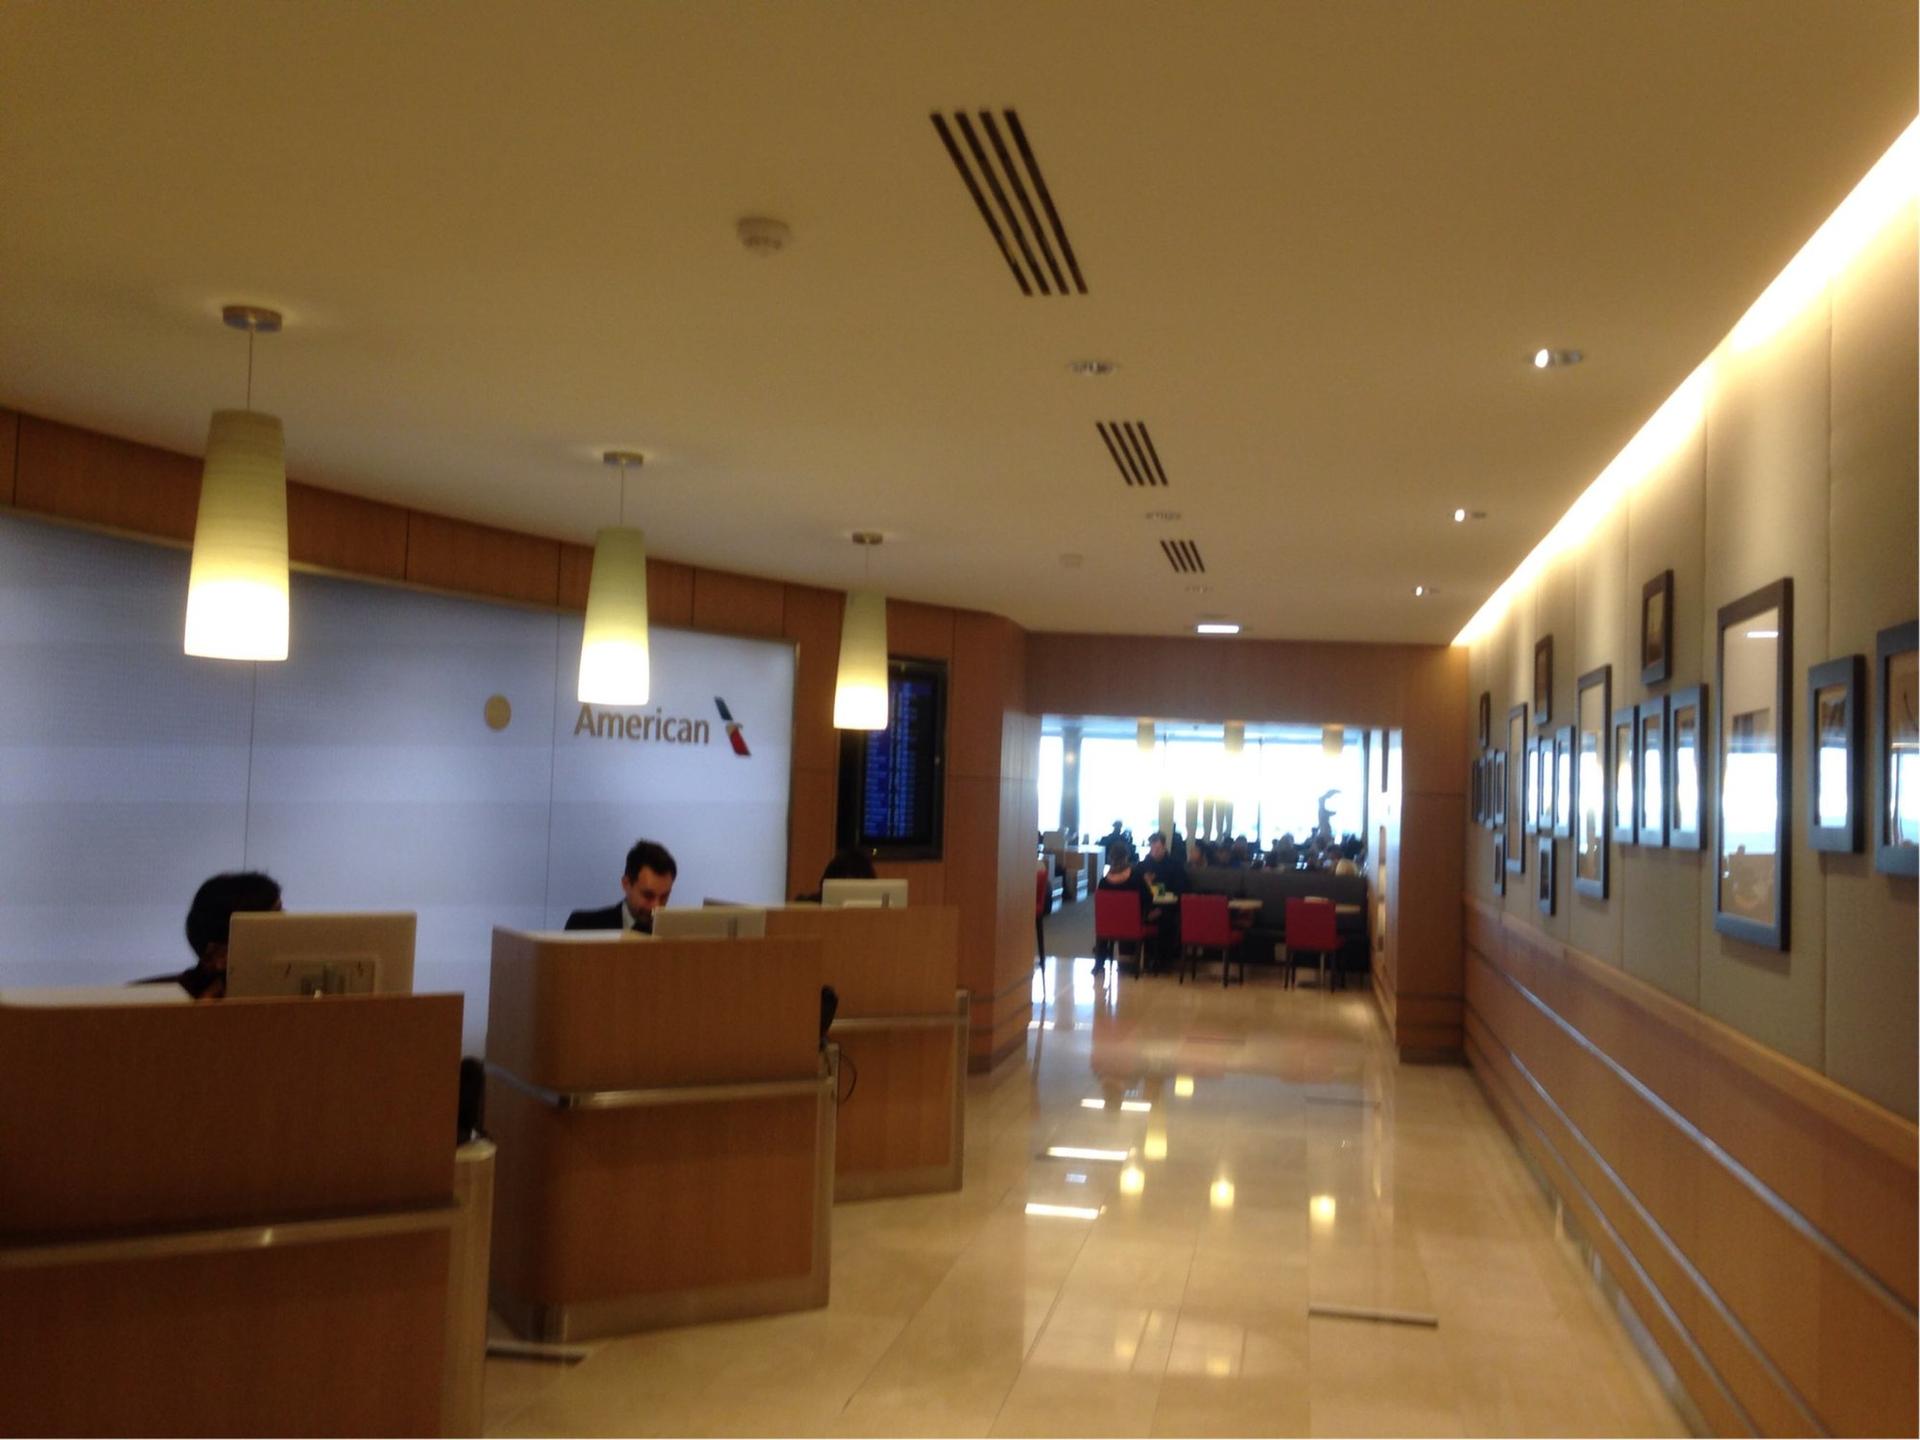 American Airlines Admirals Club  image 12 of 25